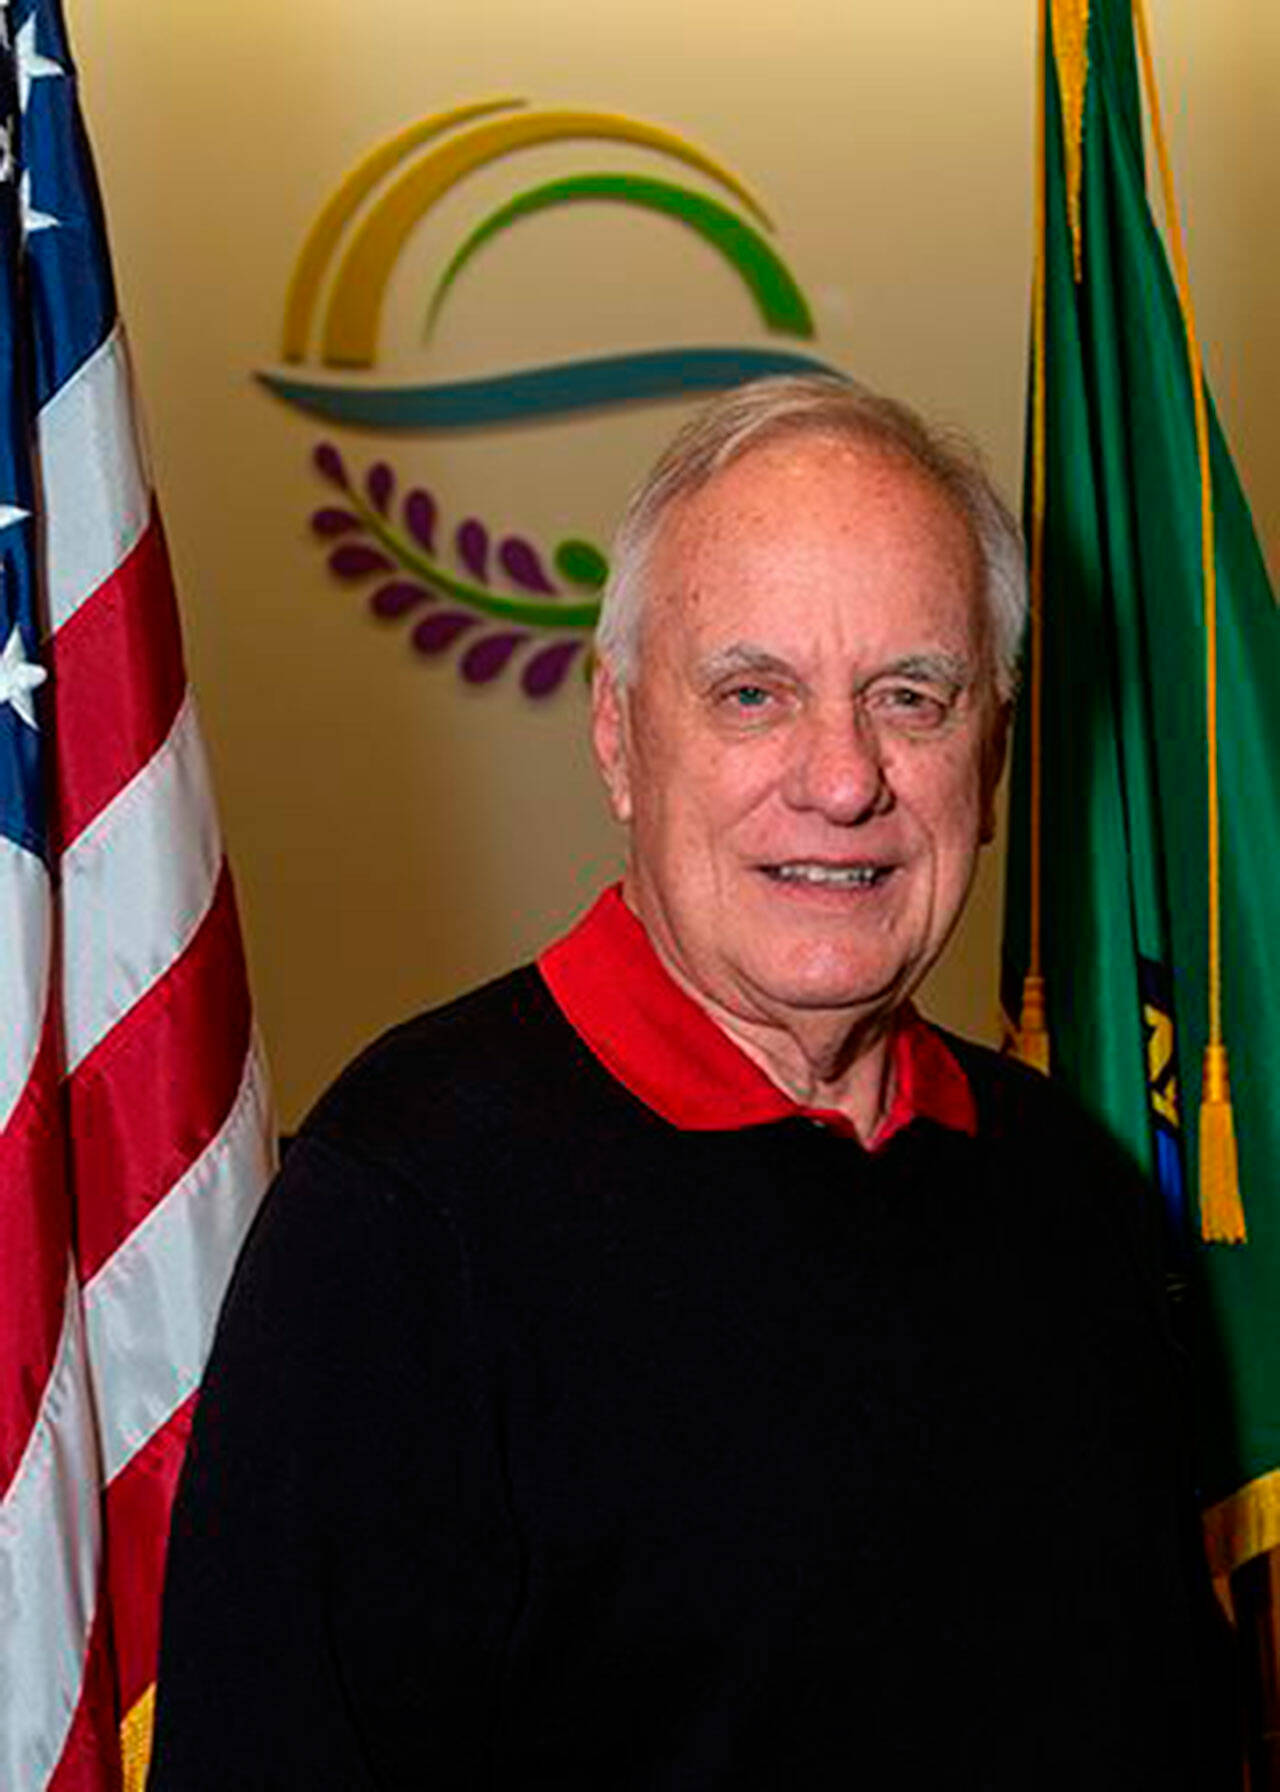 Tom Ferrell was elected to the Sequim City Council in 2019 and reelected in 2023. He resigned from the position on March 11 and council members have opened up his seat to applicants through Friday. (City of Sequim)